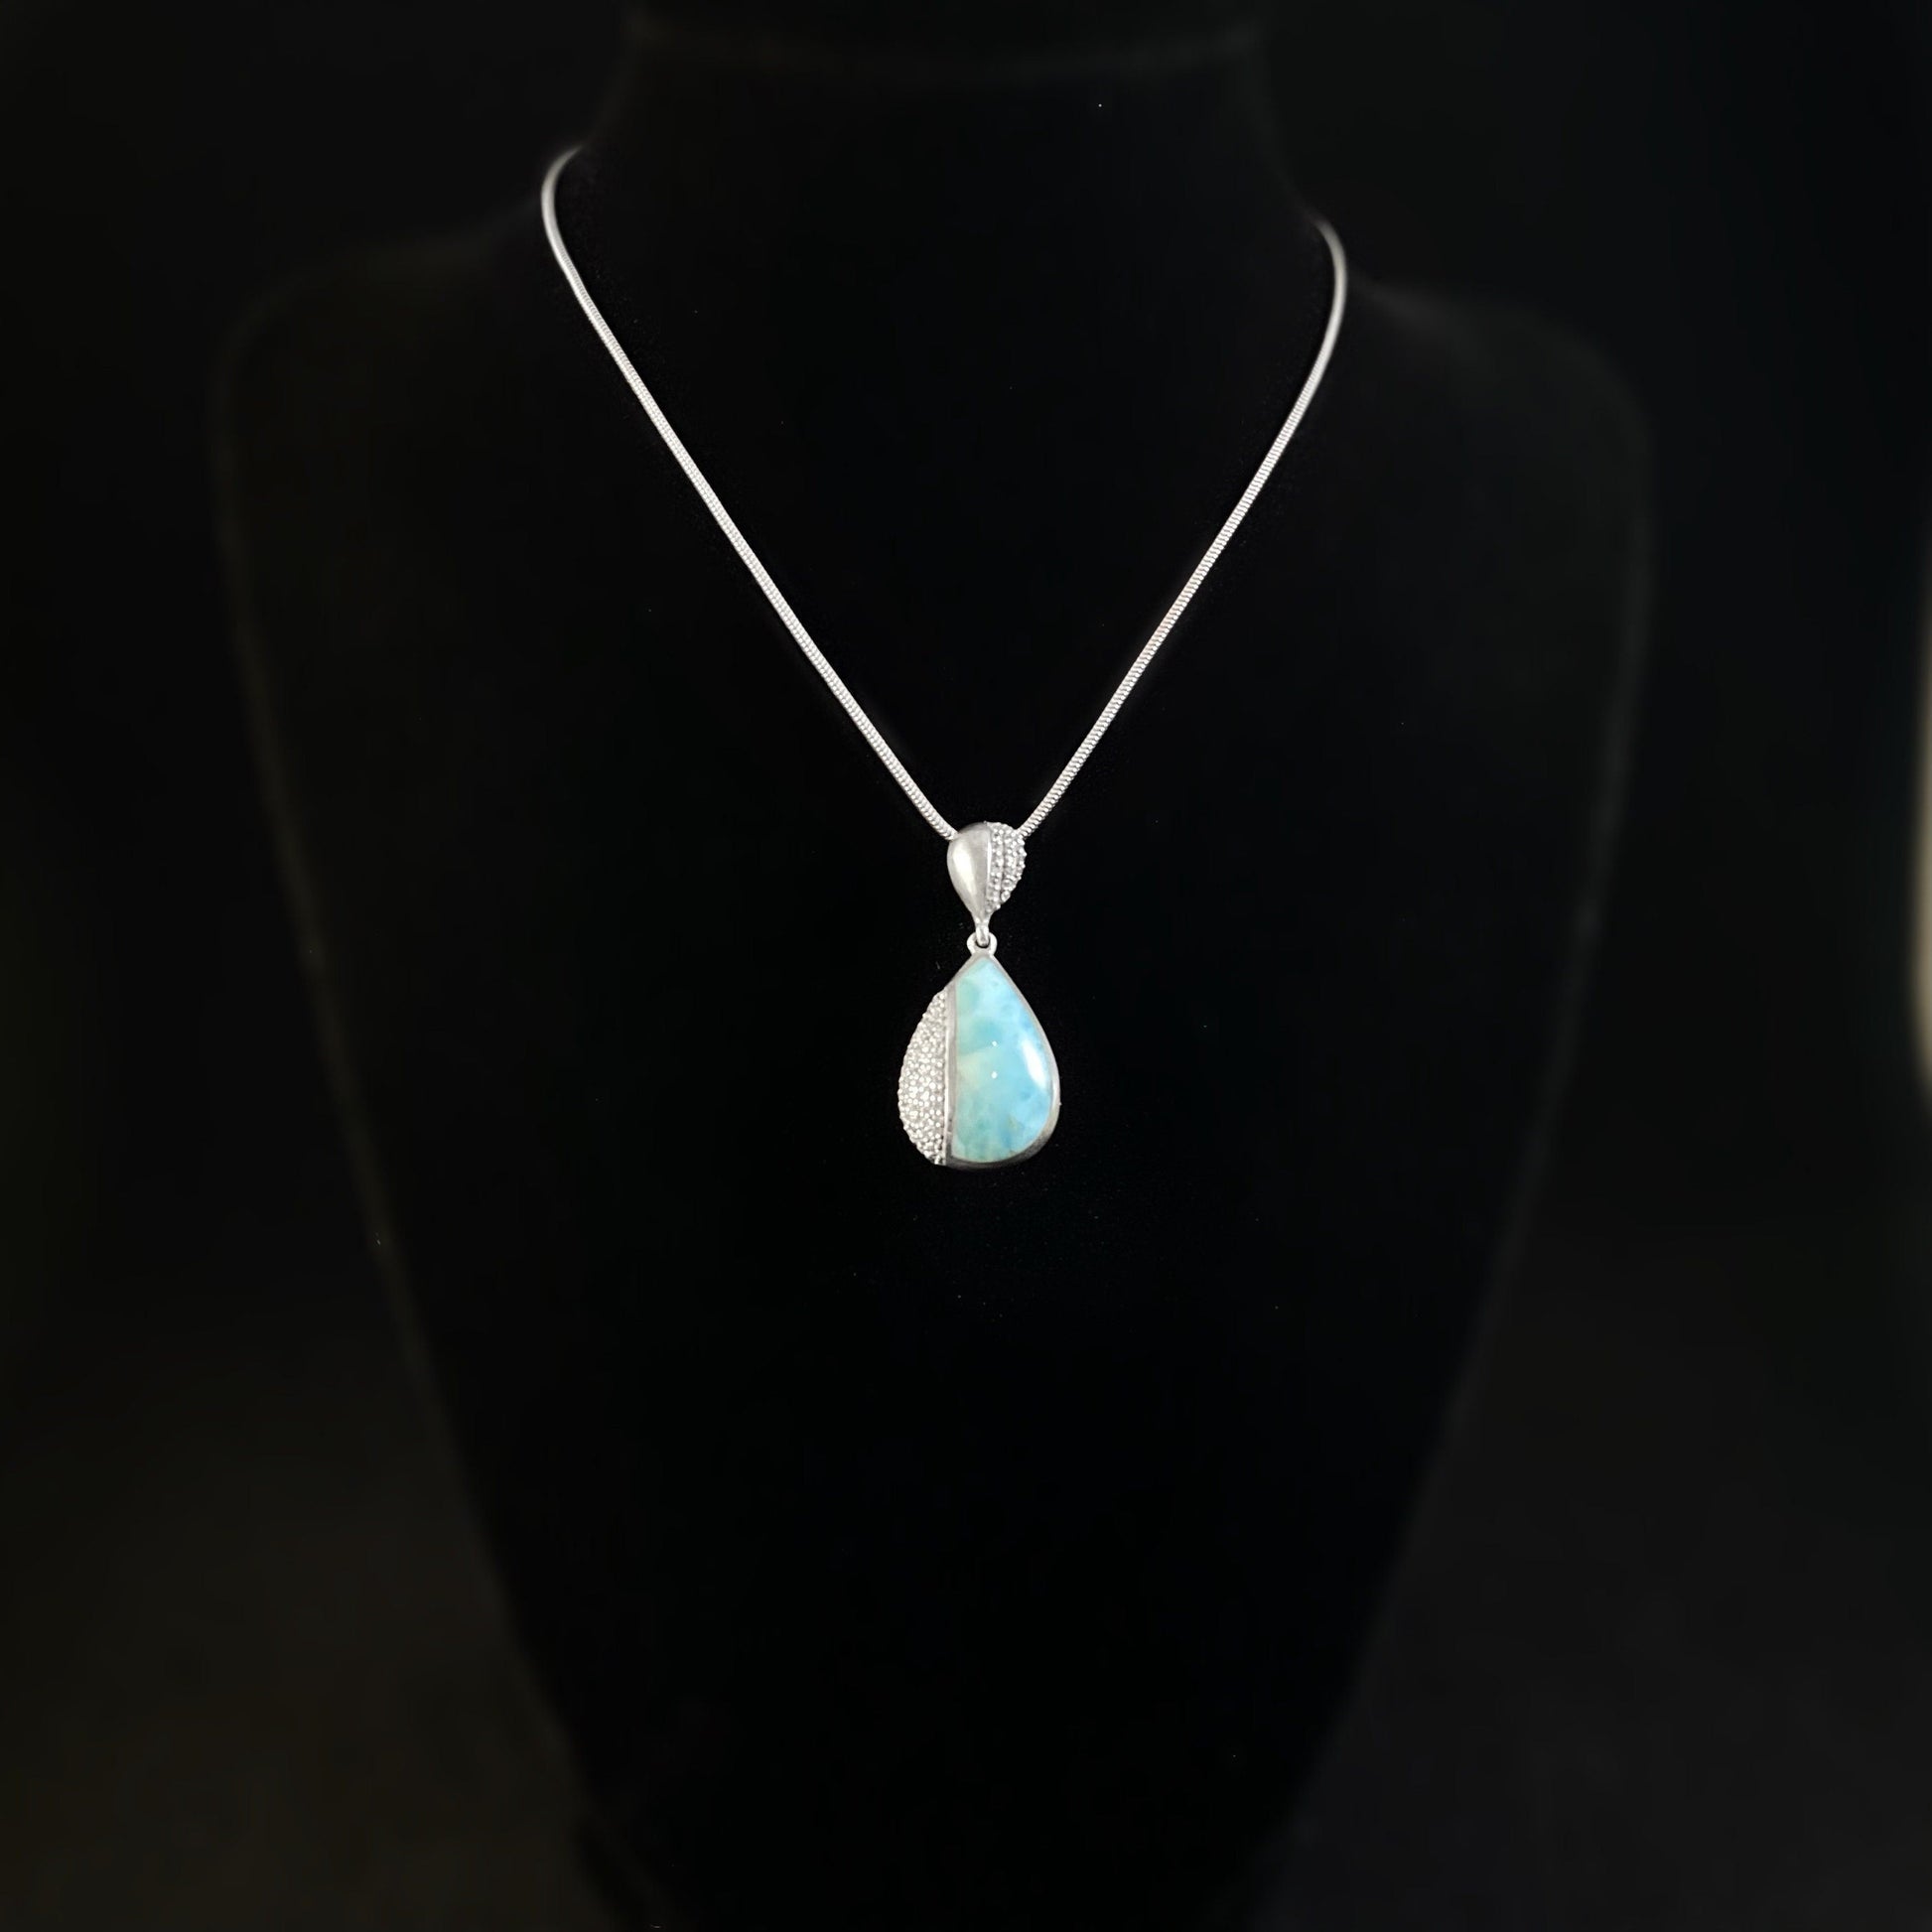 Marahlago Larimar and Sterling Silver Divine Necklace